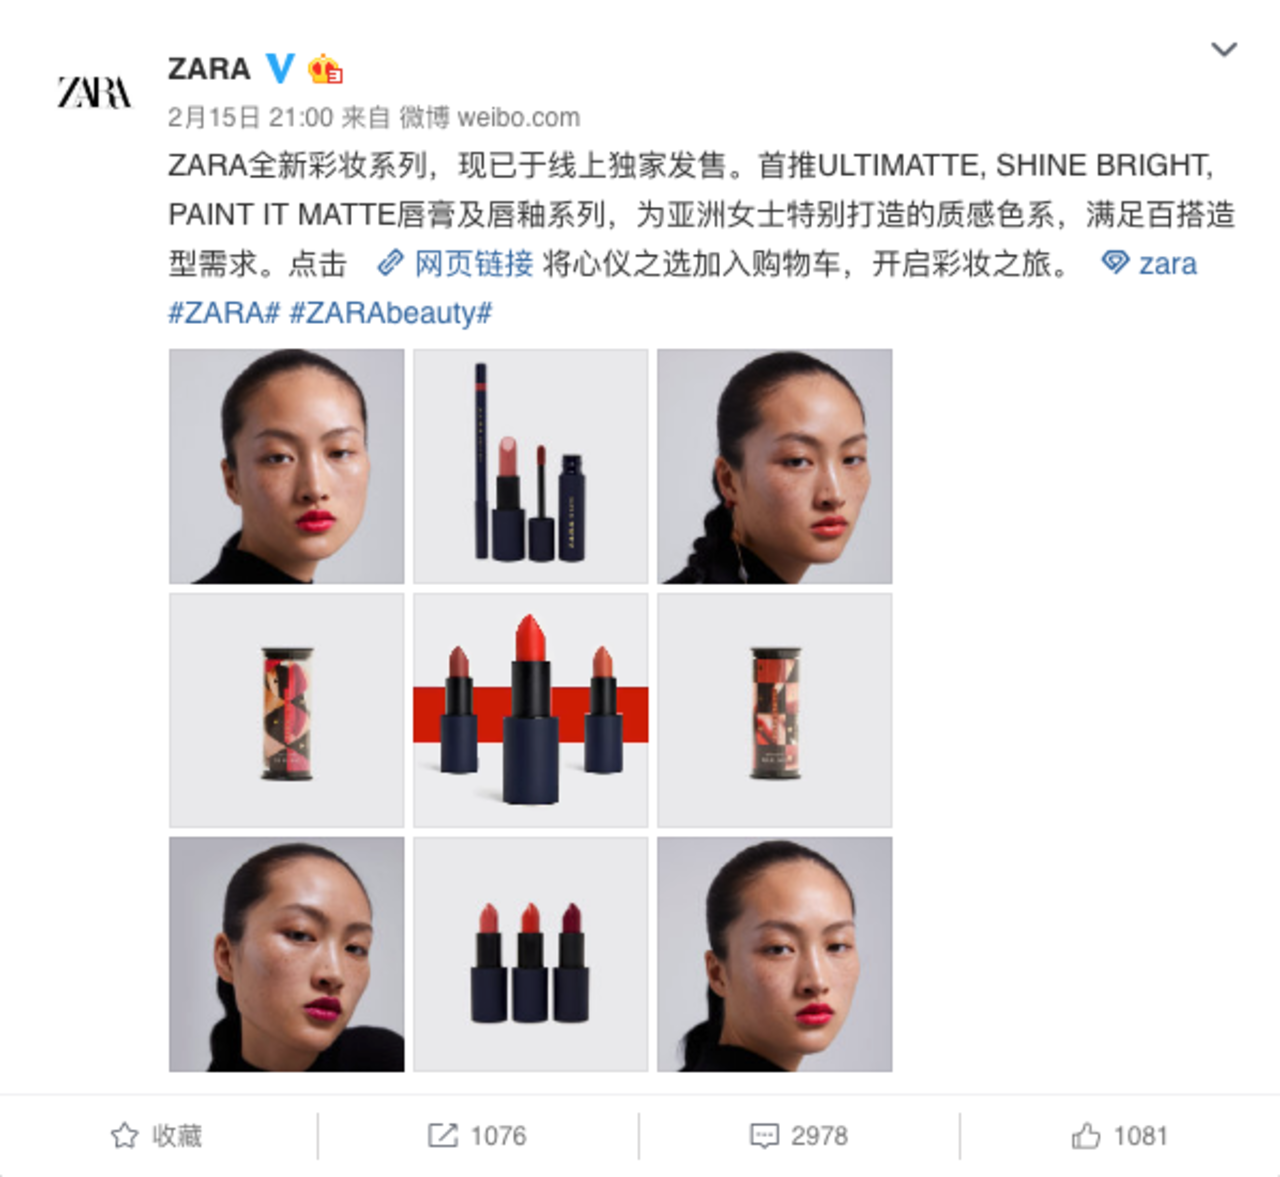 ZARA's beauty campaign on Weibo sparked a debate on Chinese beauty standards.